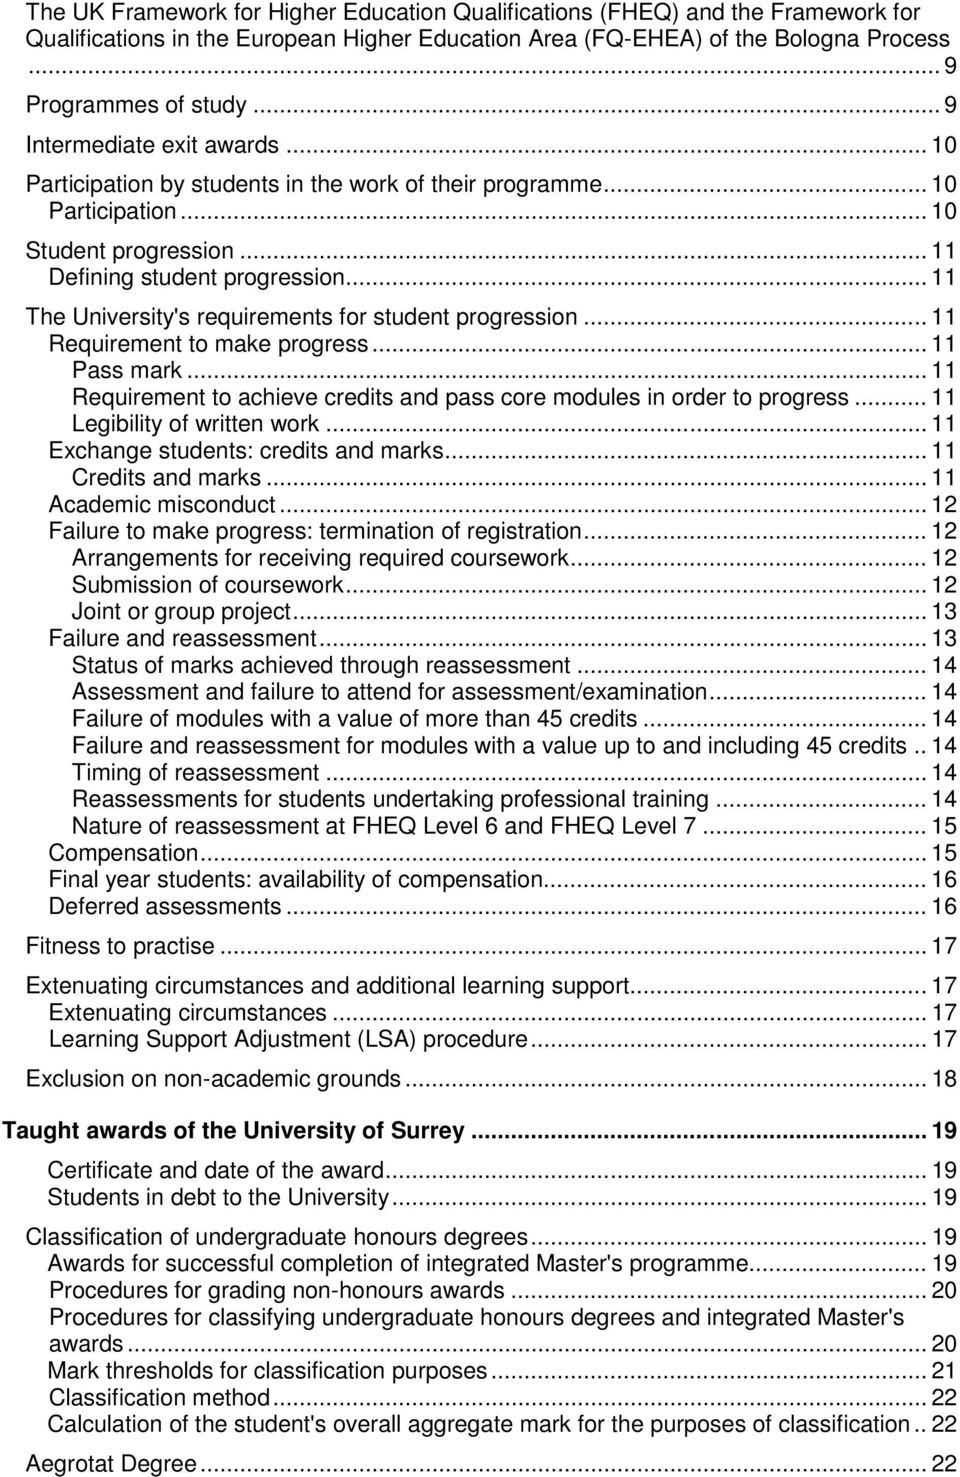 .. 11 The University's requirements for student progression... 11 Requirement to make progress... 11 Pass mark... 11 Requirement to achieve credits and pass core modules in order to progress.